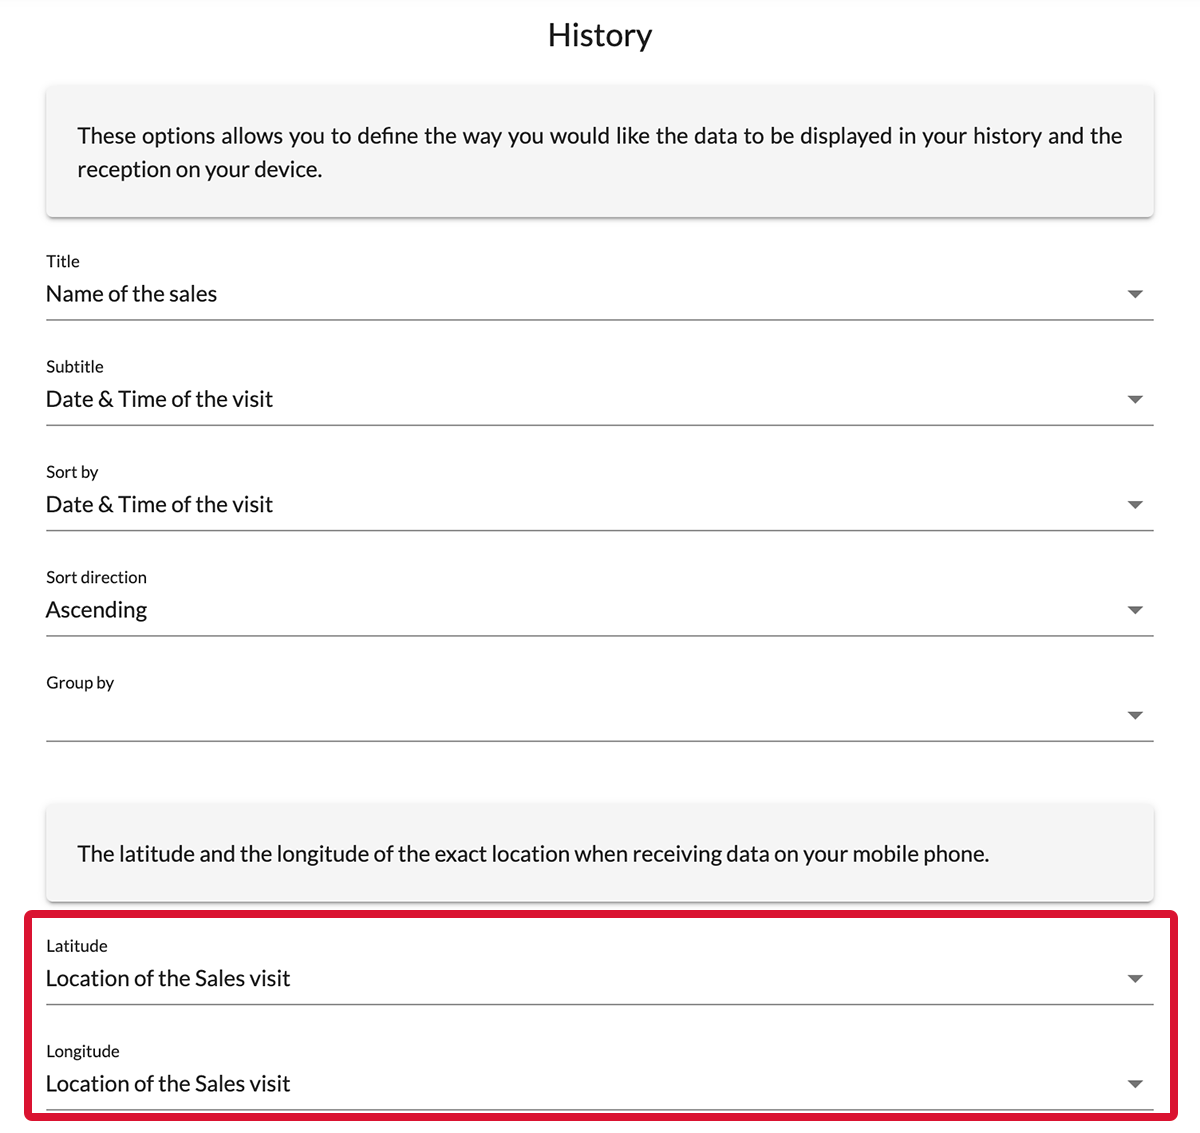 Go to the forms option, history tab.